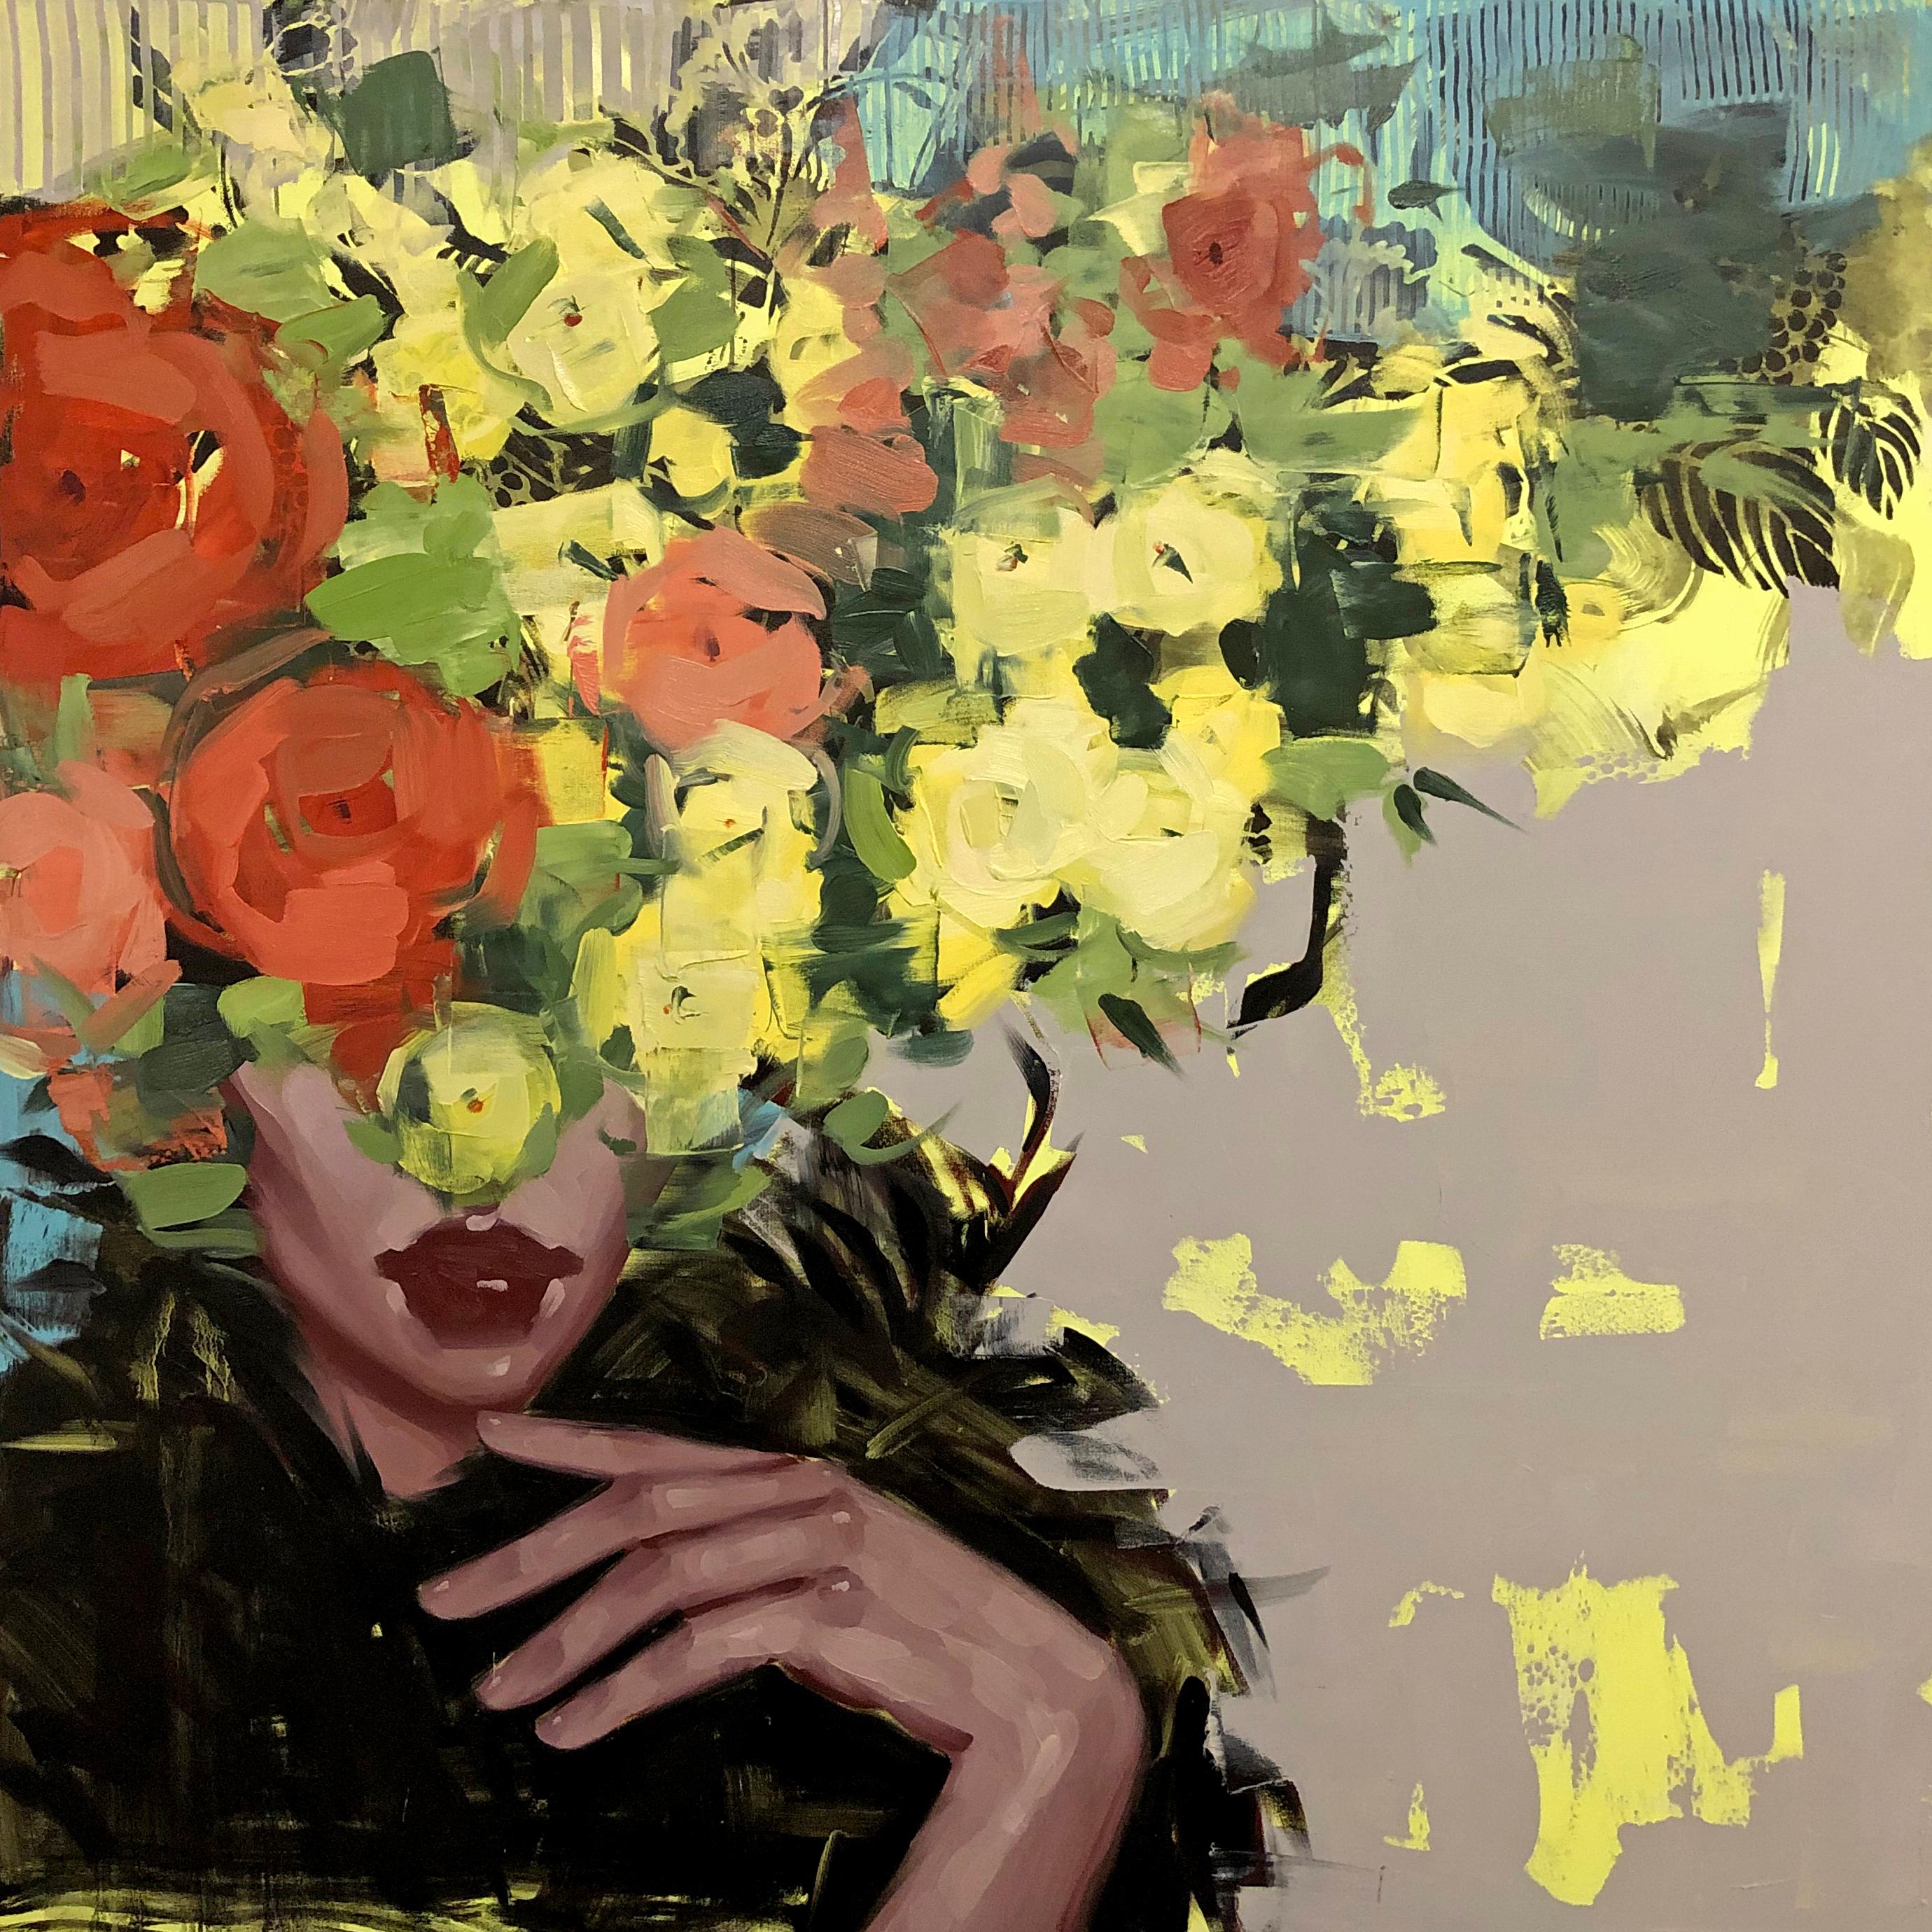 ANNA KINCAIDE
Give Me Something to Dream About 
Oil on Canvas
60 x 60 inches

Communicating emotion and narrative with limited assistance from her figure’s facial expressions, Anna Kincaide creates cascades of flowers that cover her subjects to